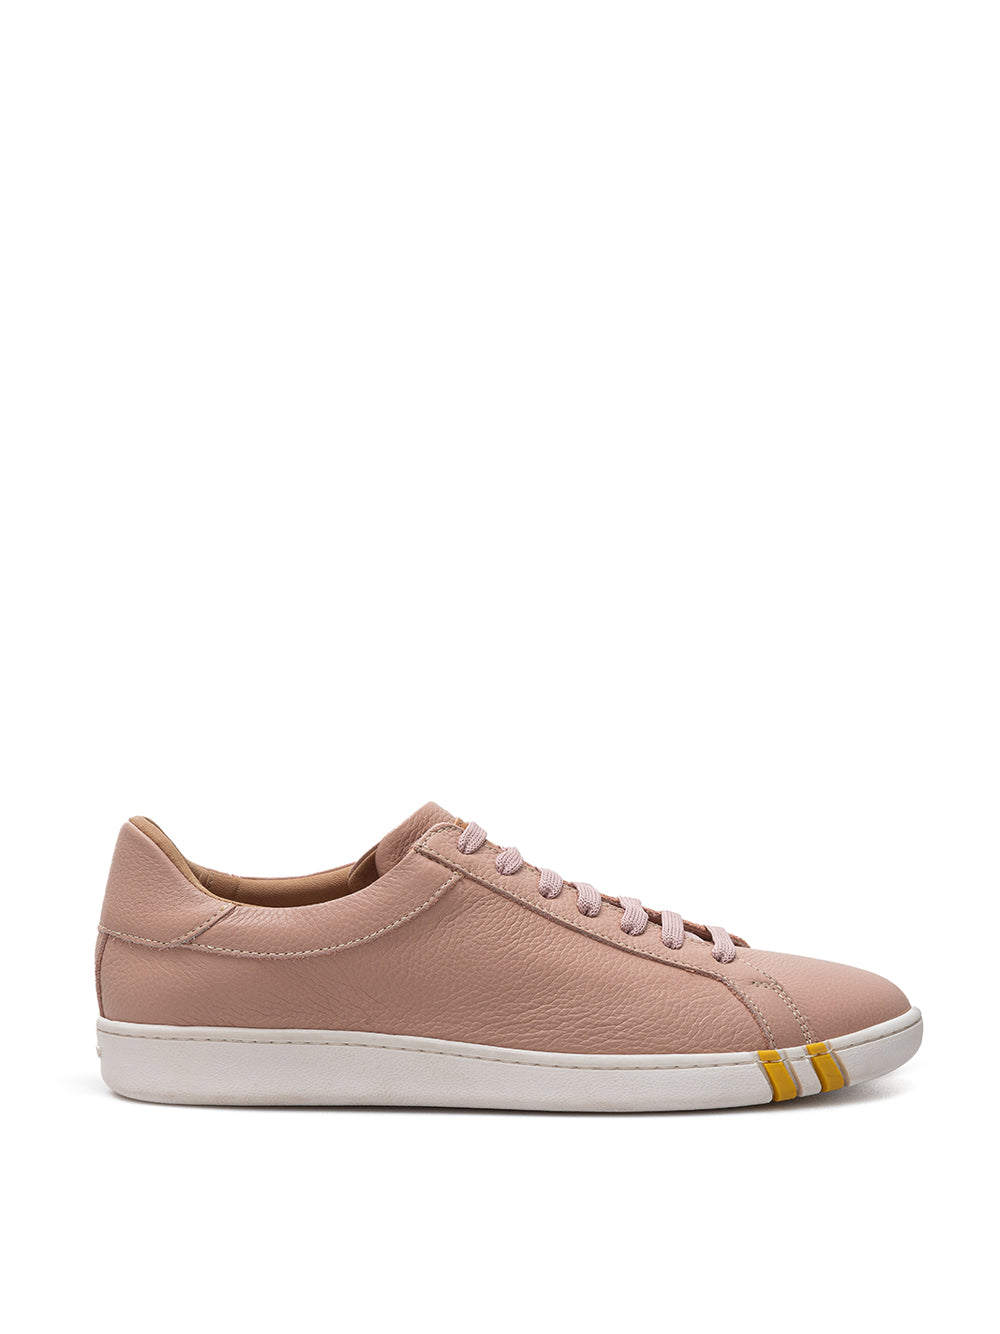 Chic Pink Leather Lace-Up Sneakers